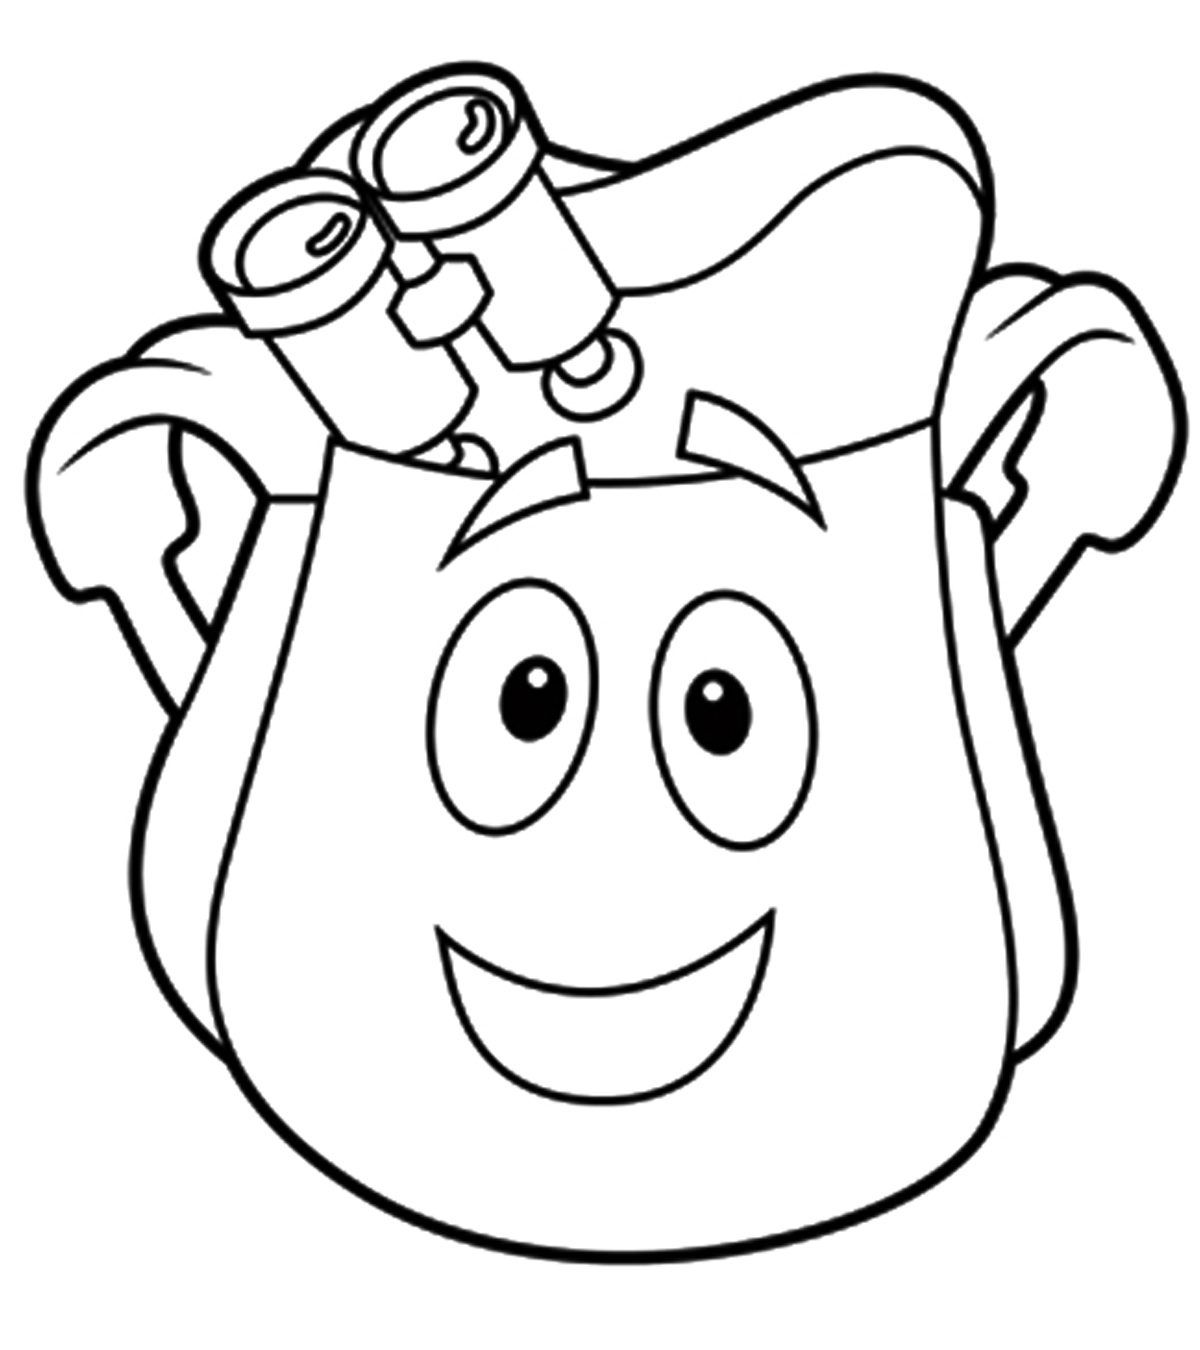 Top 10 Diego Coloring Pages Your Toddler Will Love To Color